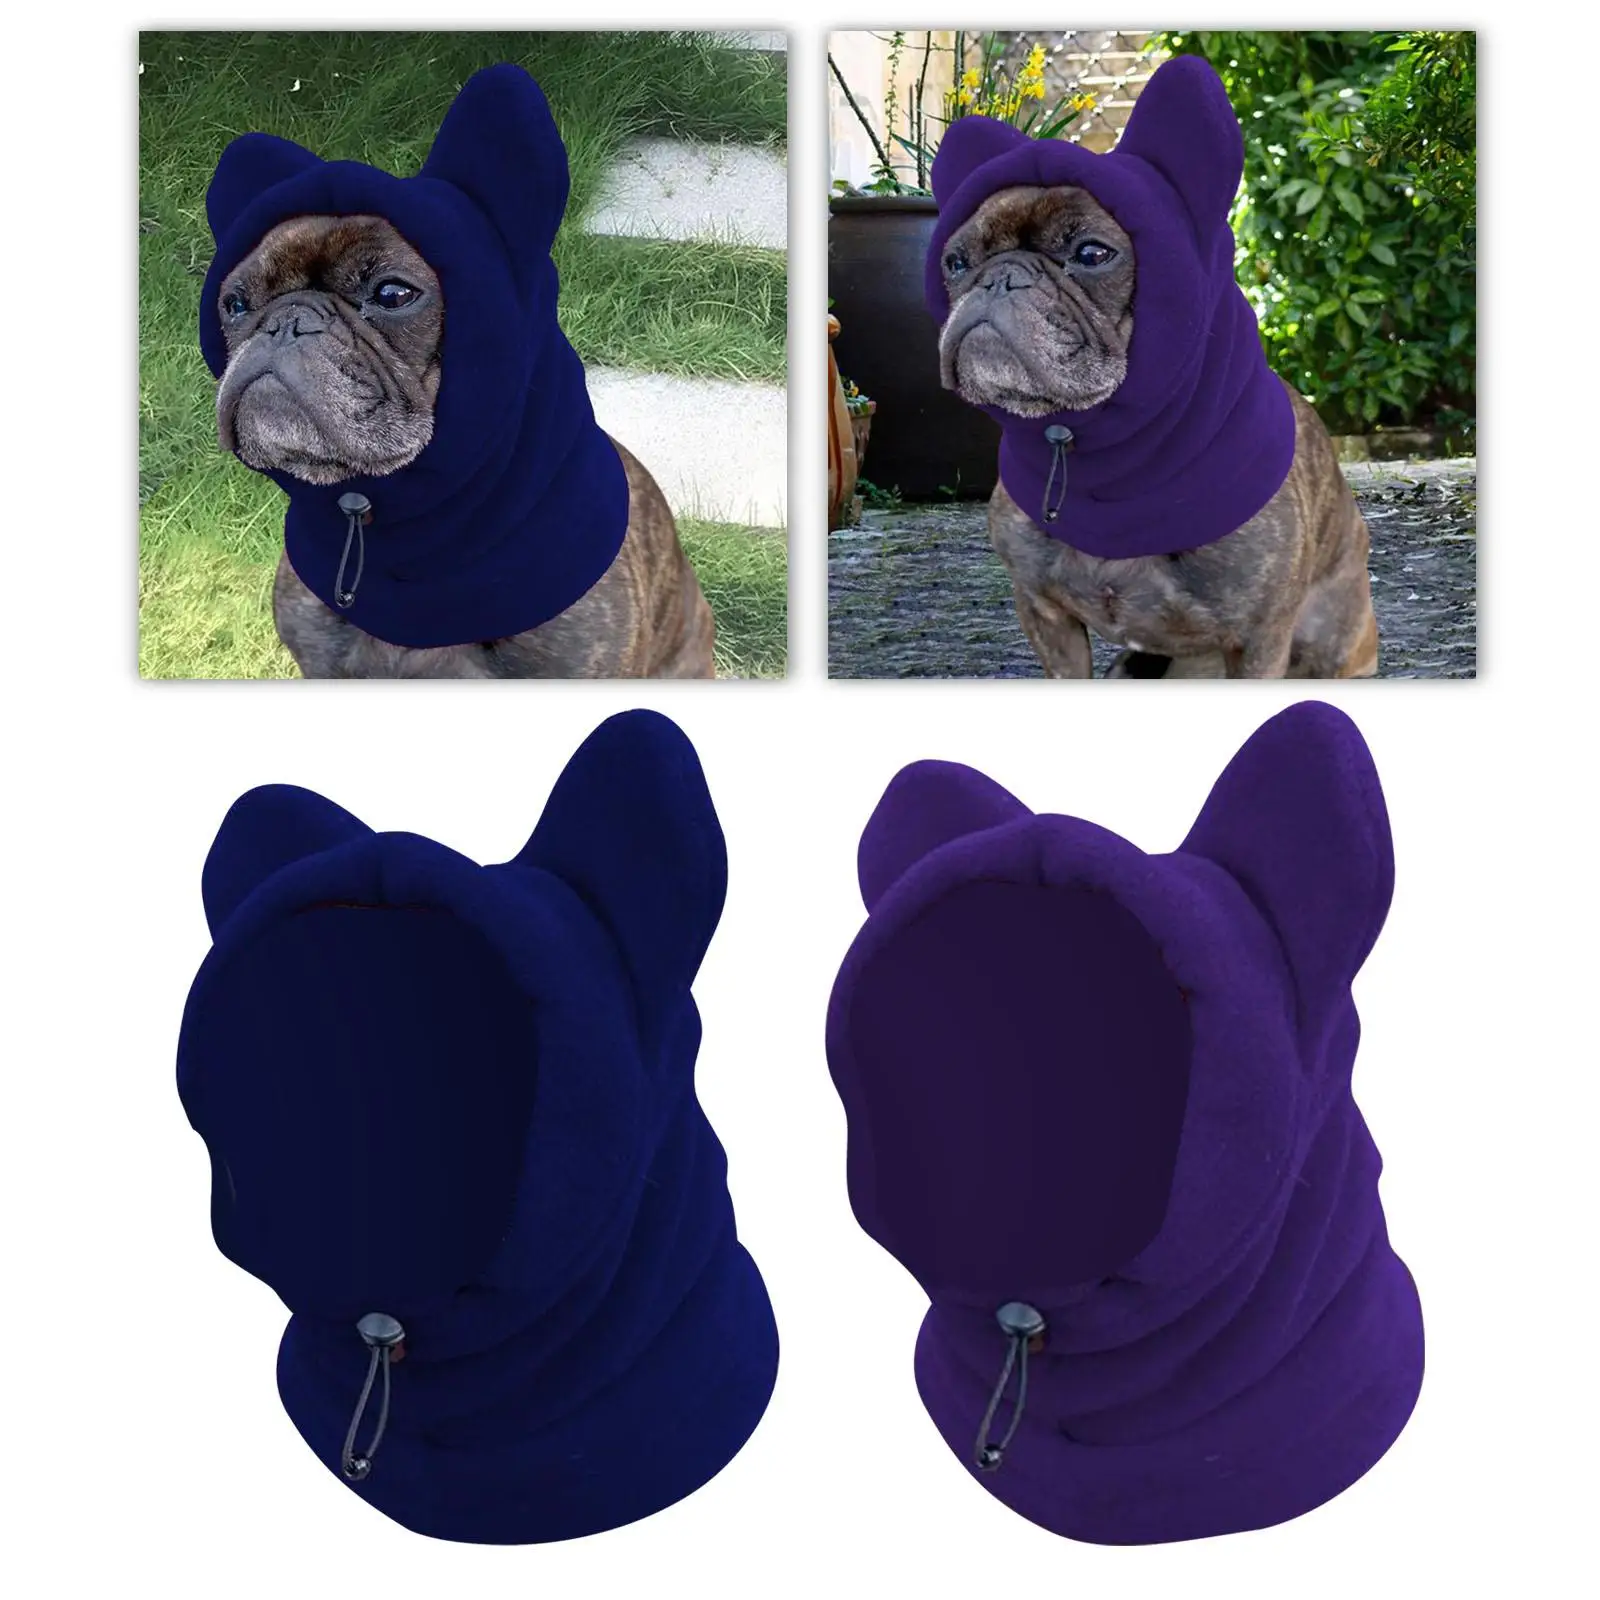 Dog Hood Warm Hat Winter Pet Hat Soft Walking Thickened Ears Hoodie Dog Ears Cover for Cat Small, Medium, Large Dogs Hiking